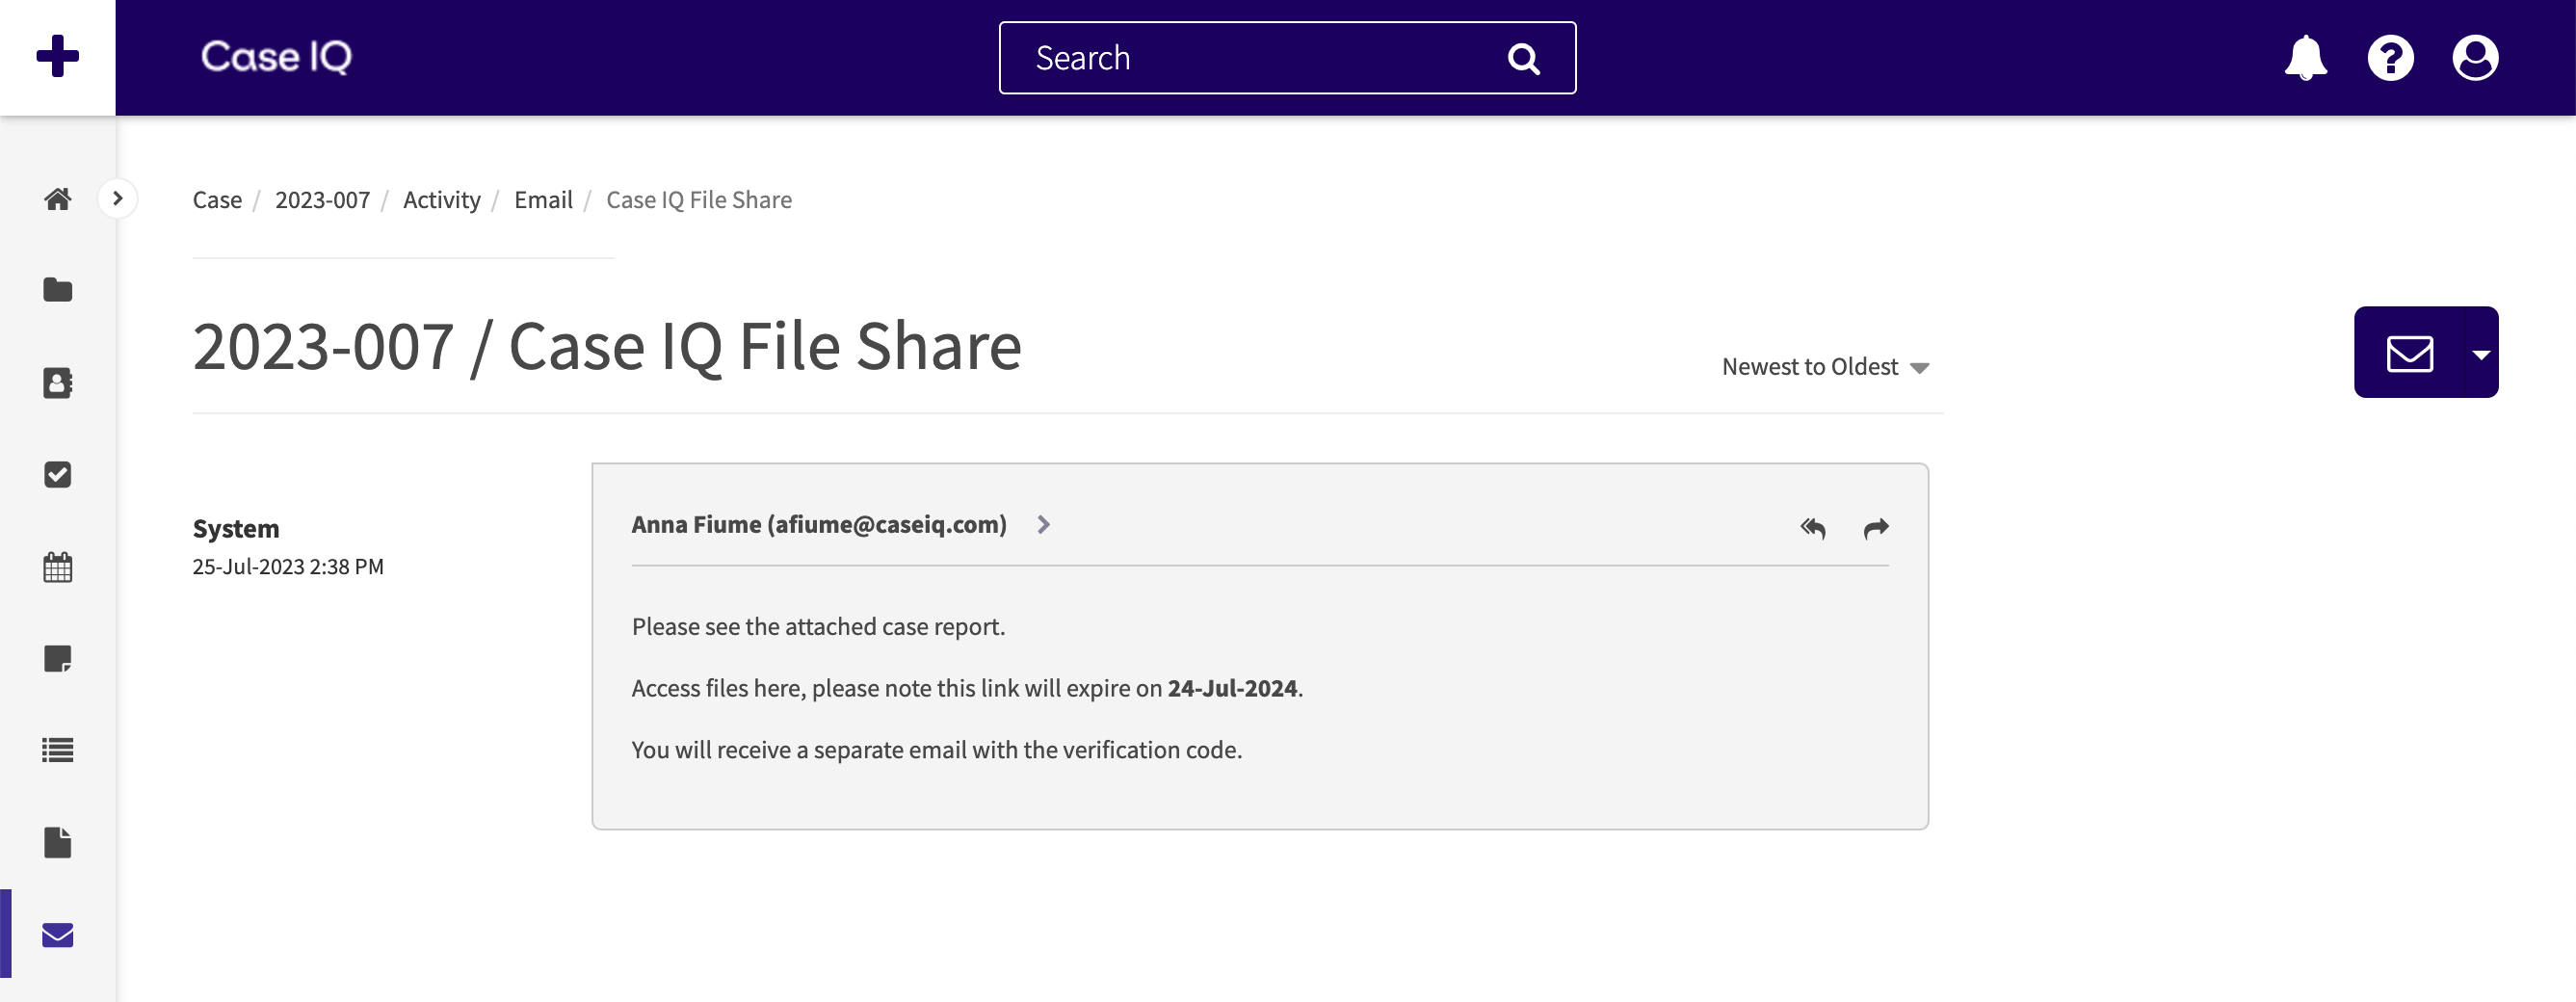 Case IQ File Share email record.